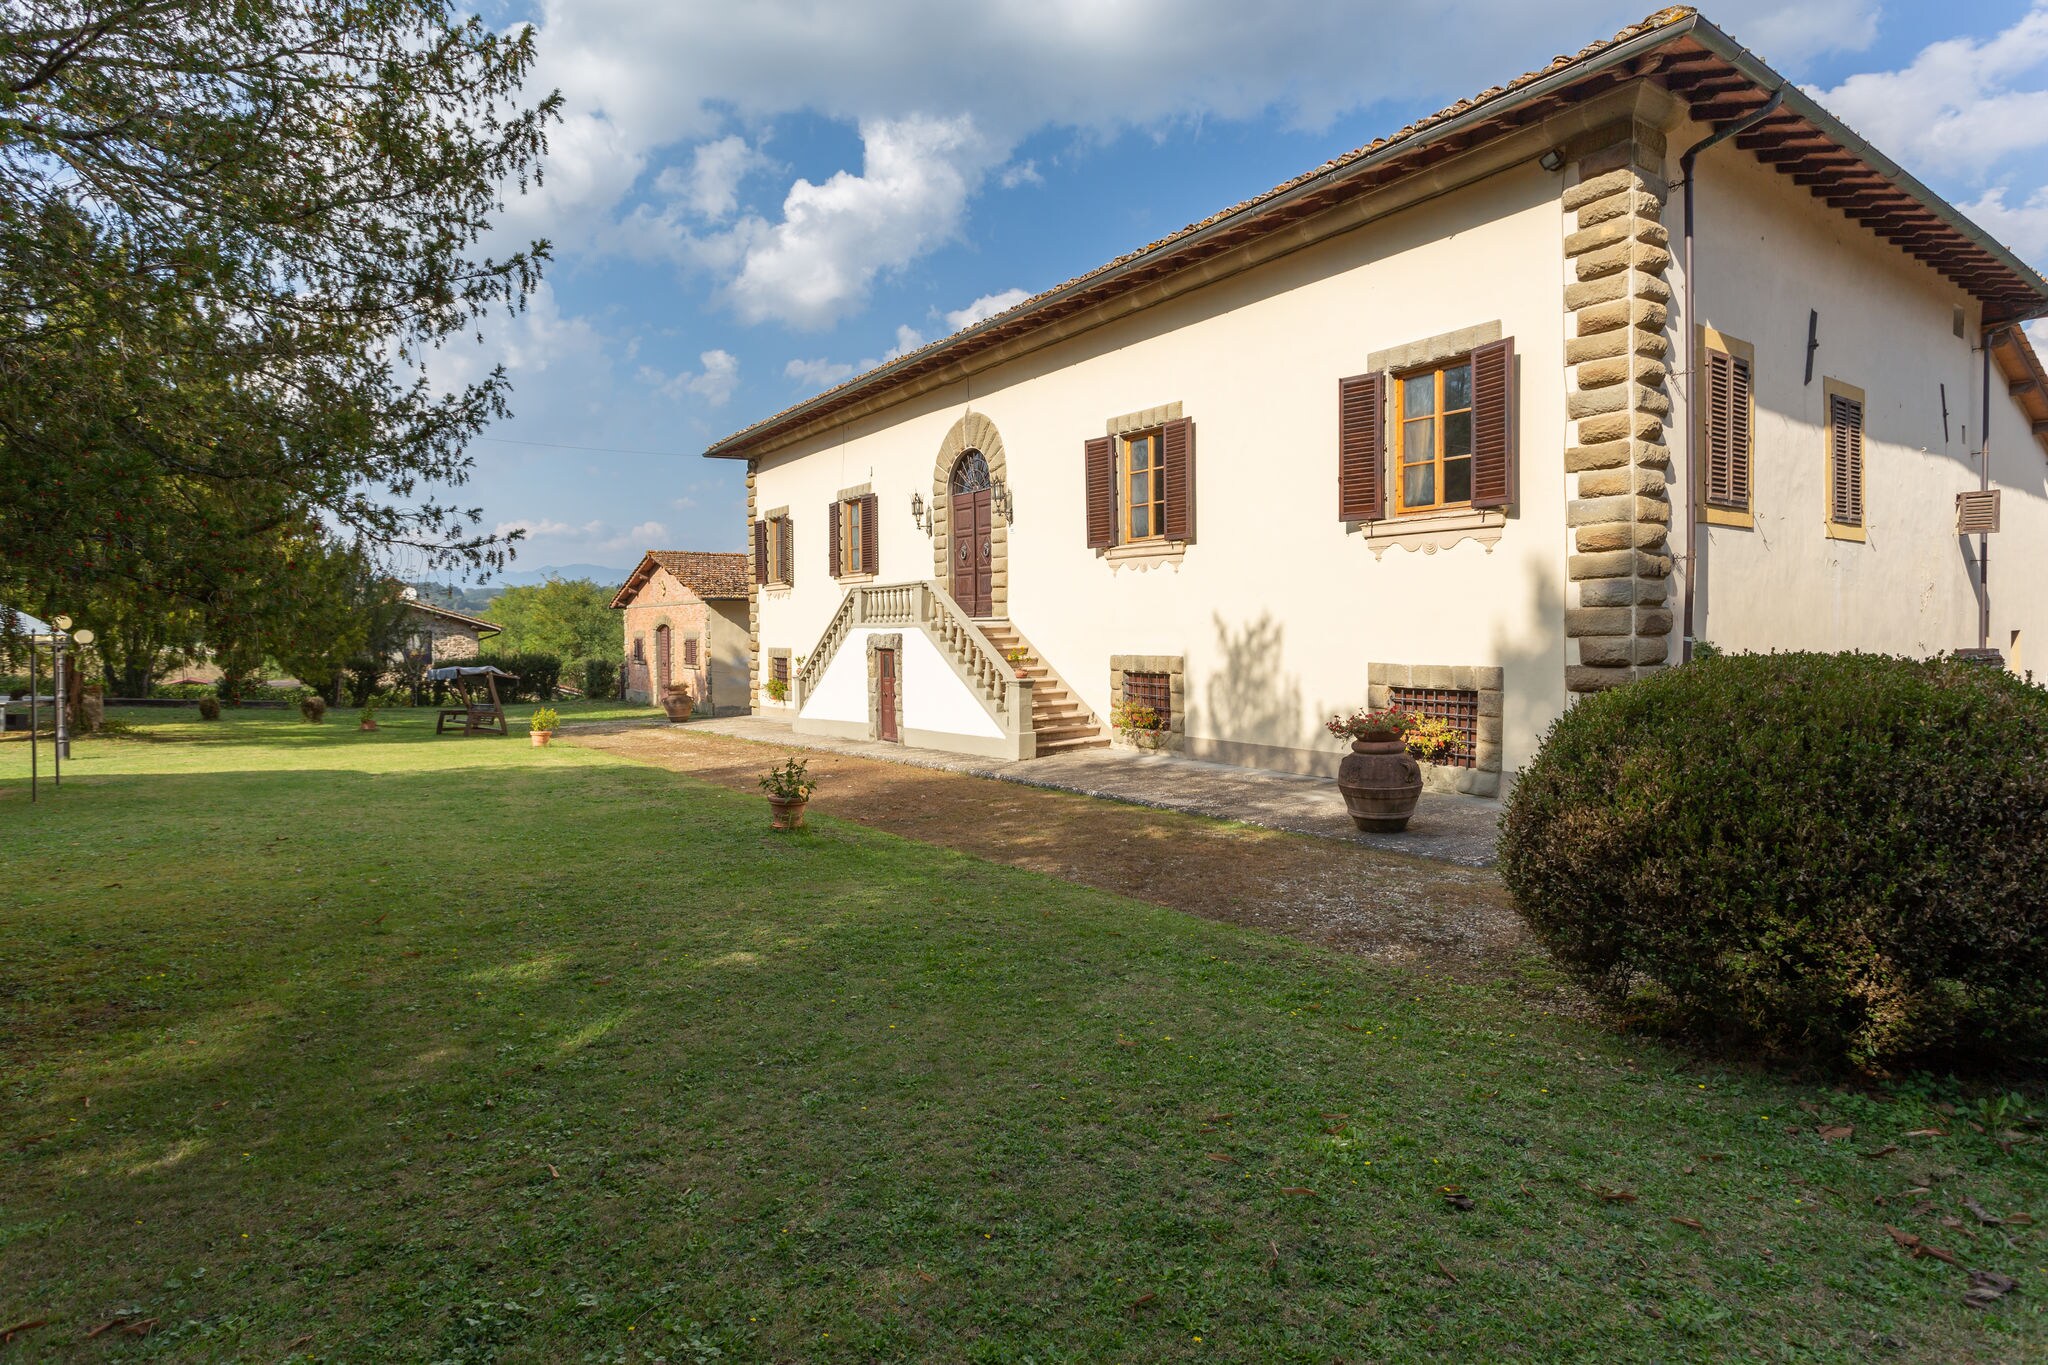 Ancient Medici villa with private pool and views of the hills of Mugello